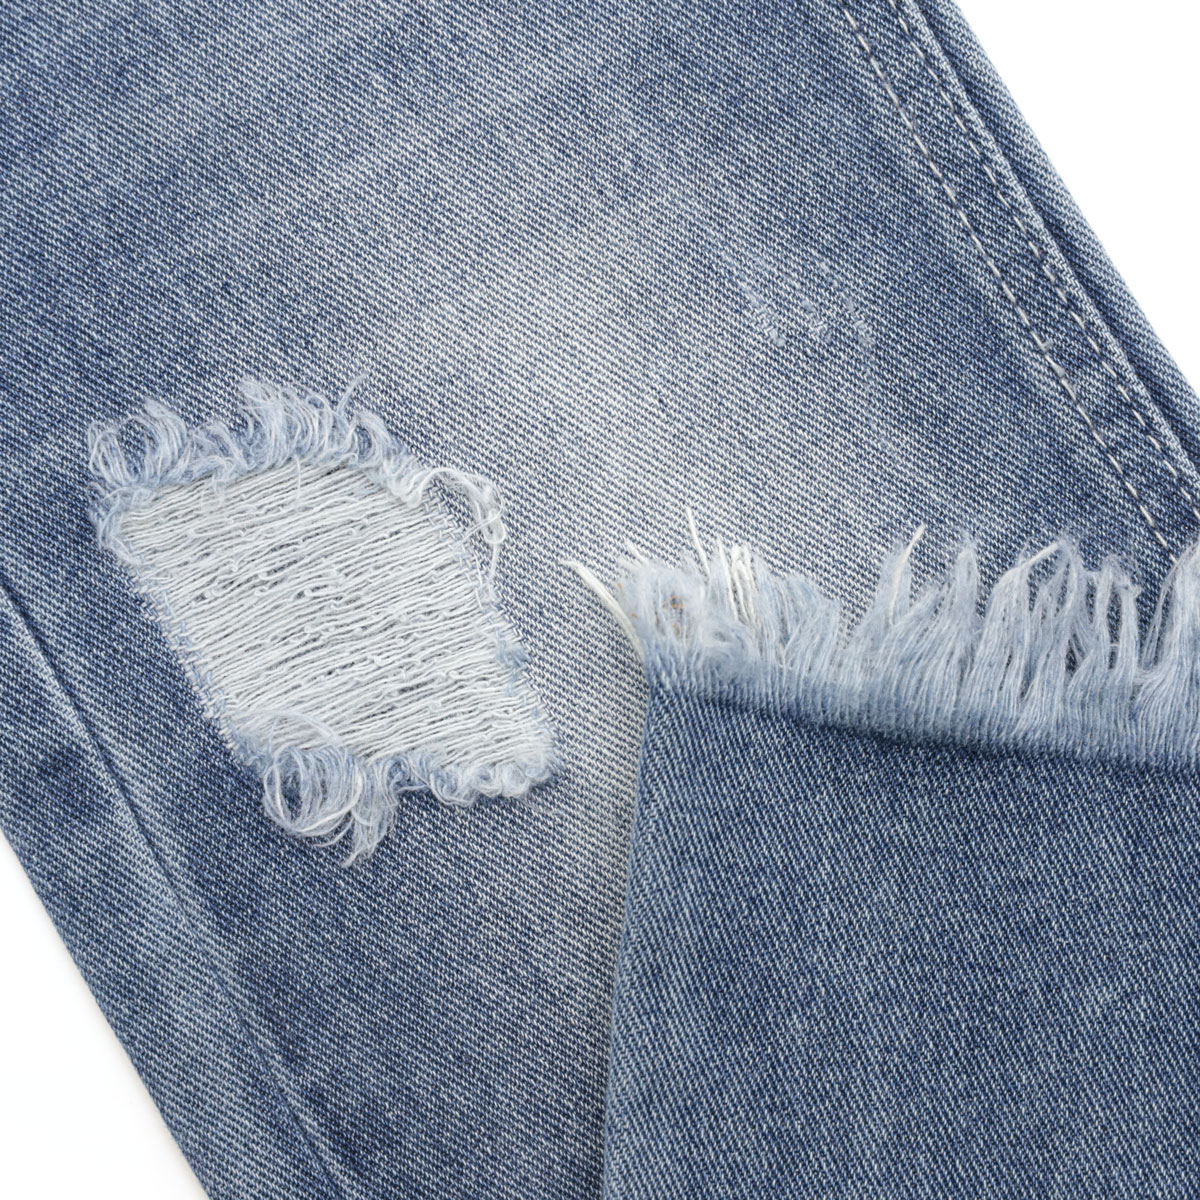 A Brief Overview on the 4 Way Stretch Denim Fabric 2